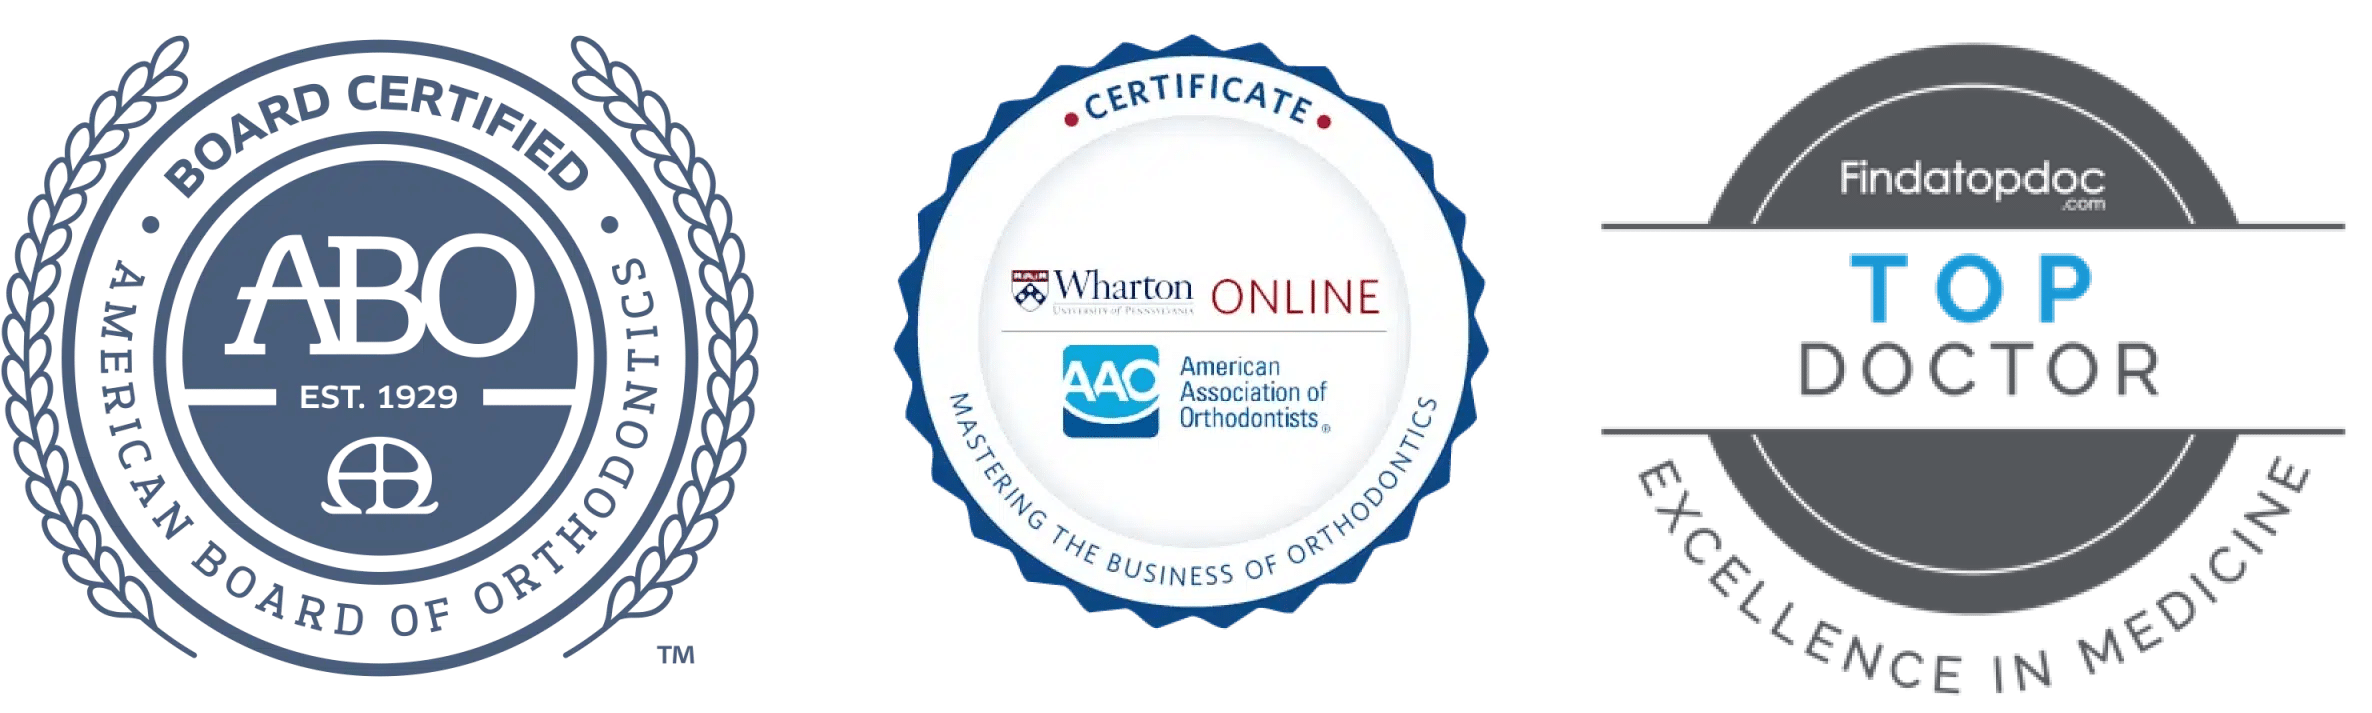 american board of orthodontics and senan being the top doctor excellence in medicine